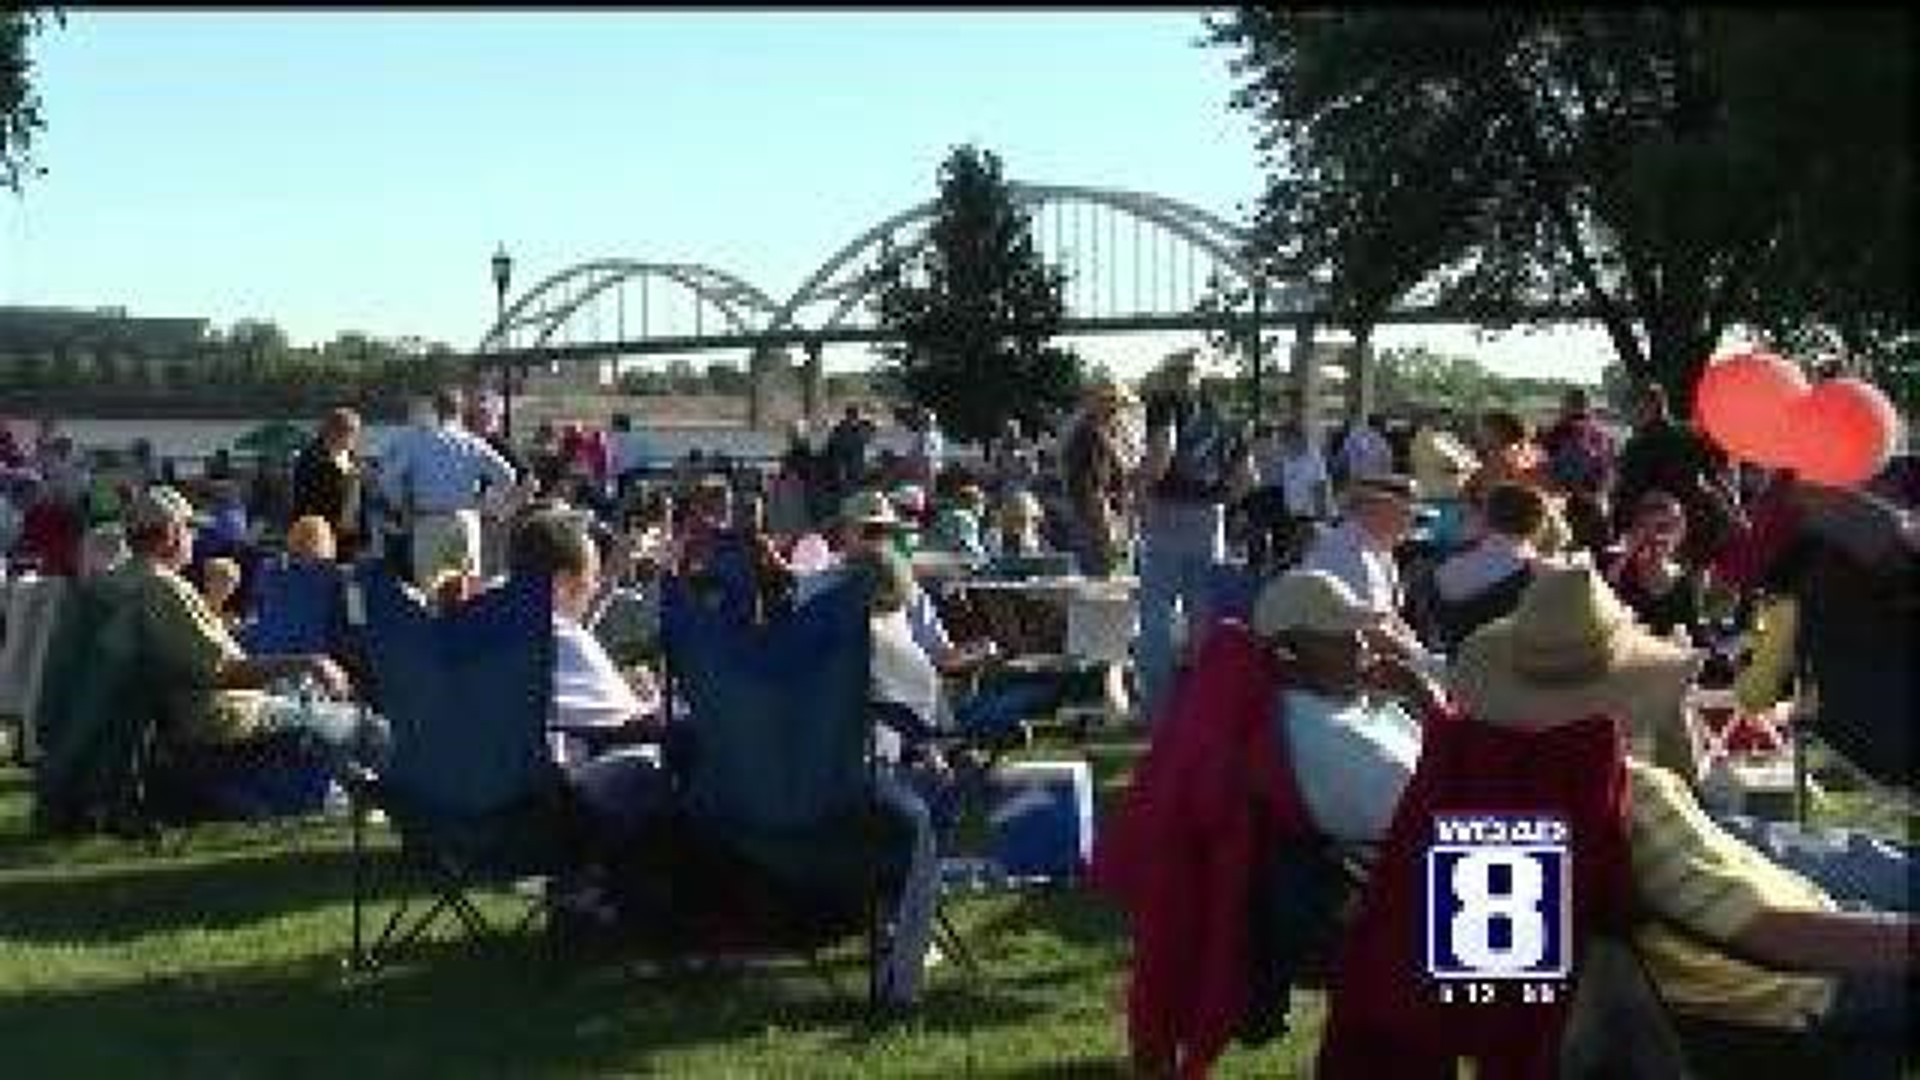 Music of Michael Jackson to be played at Riverfront Pop